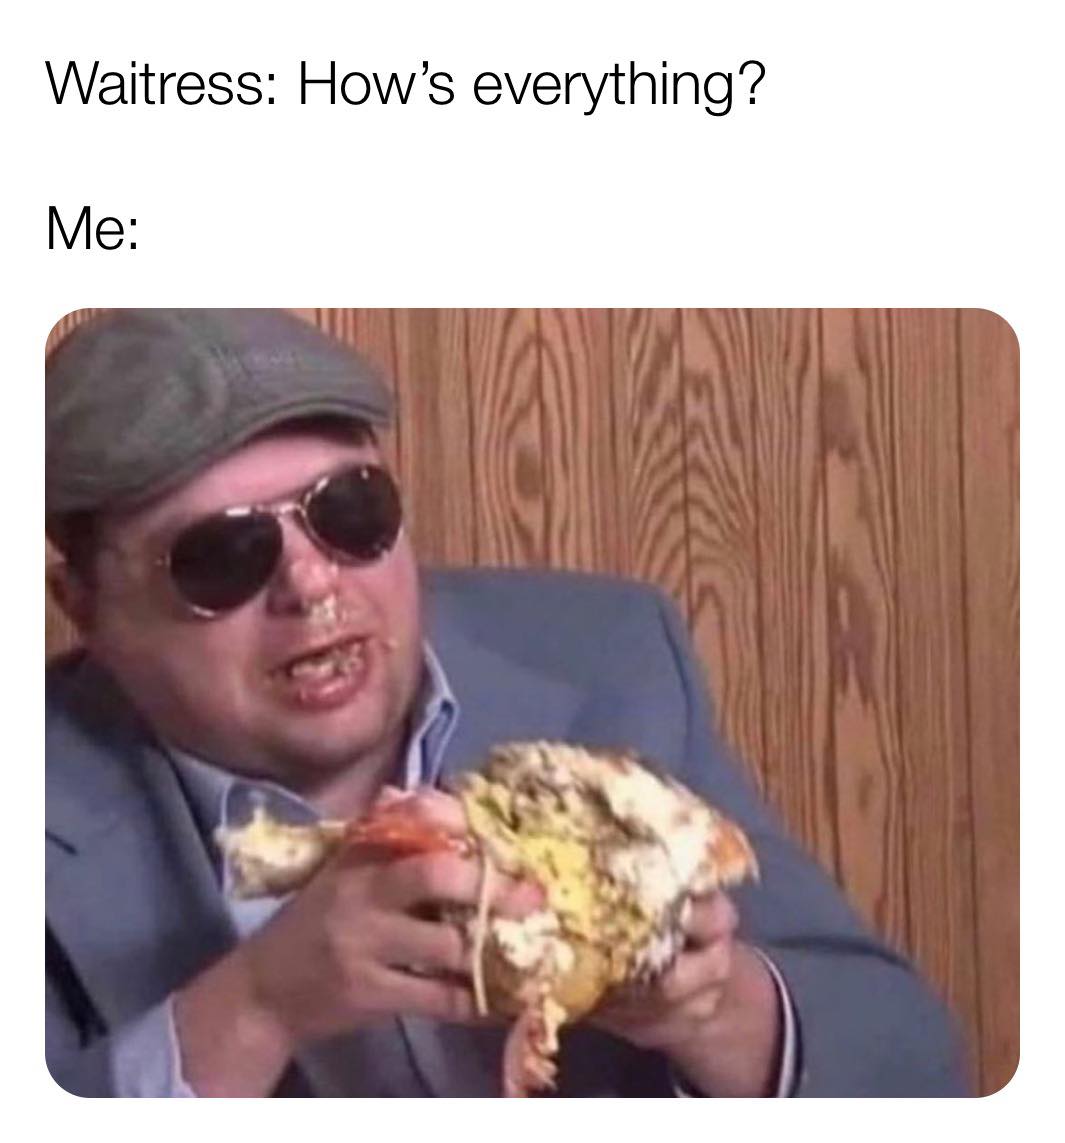 waitress how is everything - Waitress How's everything? Me